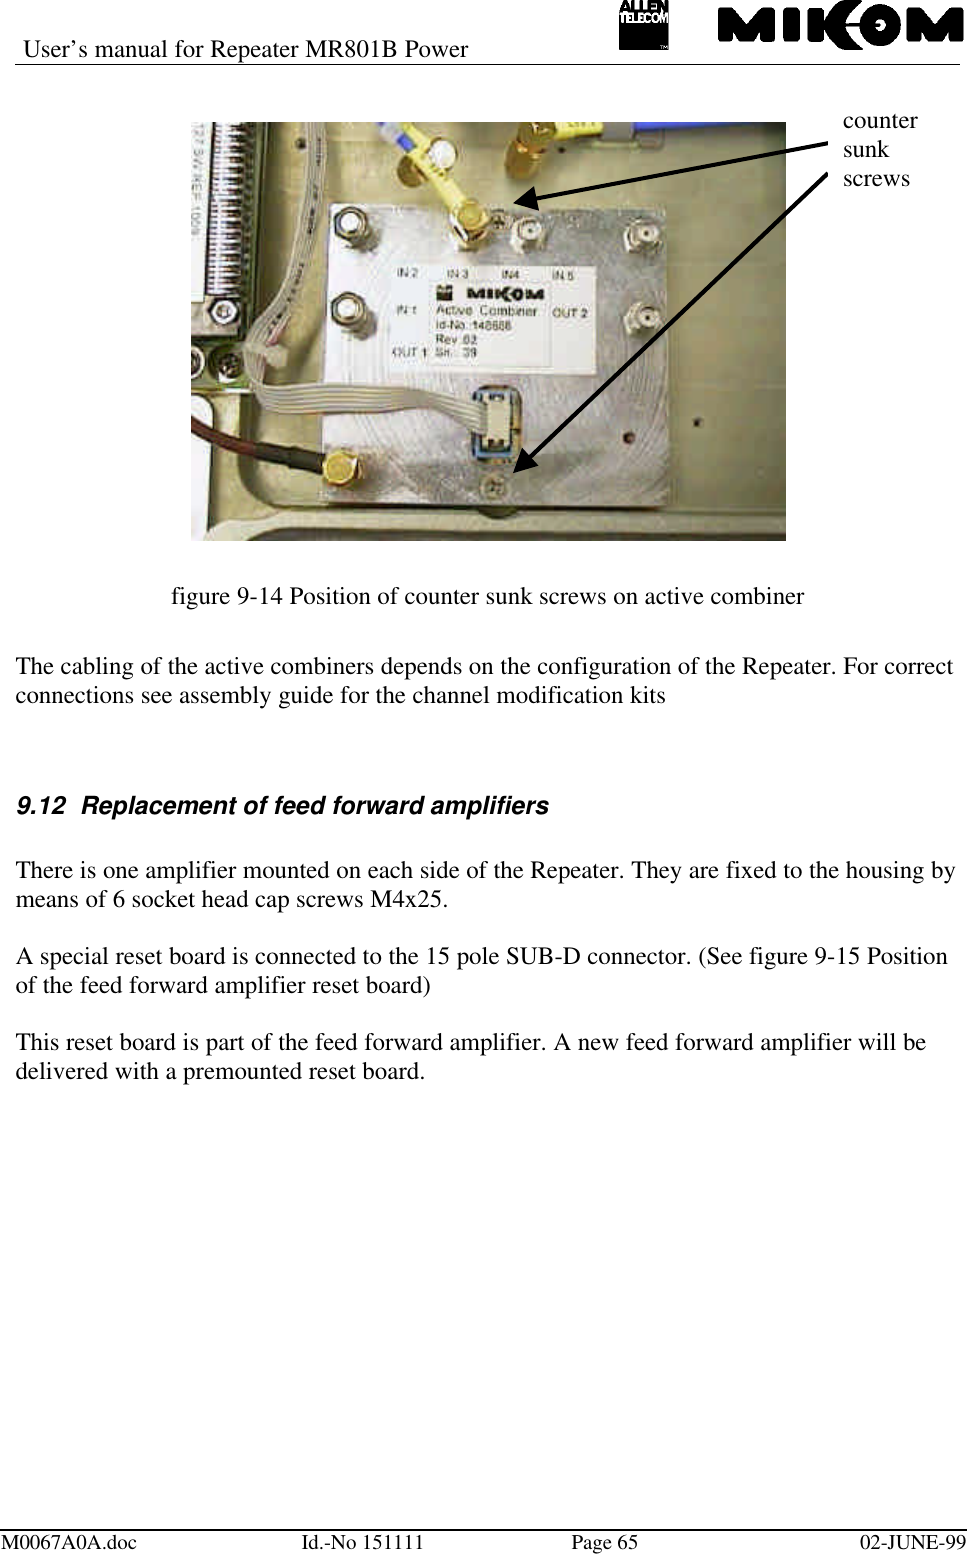 User’s manual for Repeater MR801B PowerM0067A0A.doc Id.-No 151111 Page 65 02-JUNE-99figure 9-14 Position of counter sunk screws on active combinerThe cabling of the active combiners depends on the configuration of the Repeater. For correctconnections see assembly guide for the channel modification kits9.12 Replacement of feed forward amplifiersThere is one amplifier mounted on each side of the Repeater. They are fixed to the housing bymeans of 6 socket head cap screws M4x25.A special reset board is connected to the 15 pole SUB-D connector. (See figure 9-15 Positionof the feed forward amplifier reset board)This reset board is part of the feed forward amplifier. A new feed forward amplifier will bedelivered with a premounted reset board.countersunkscrews